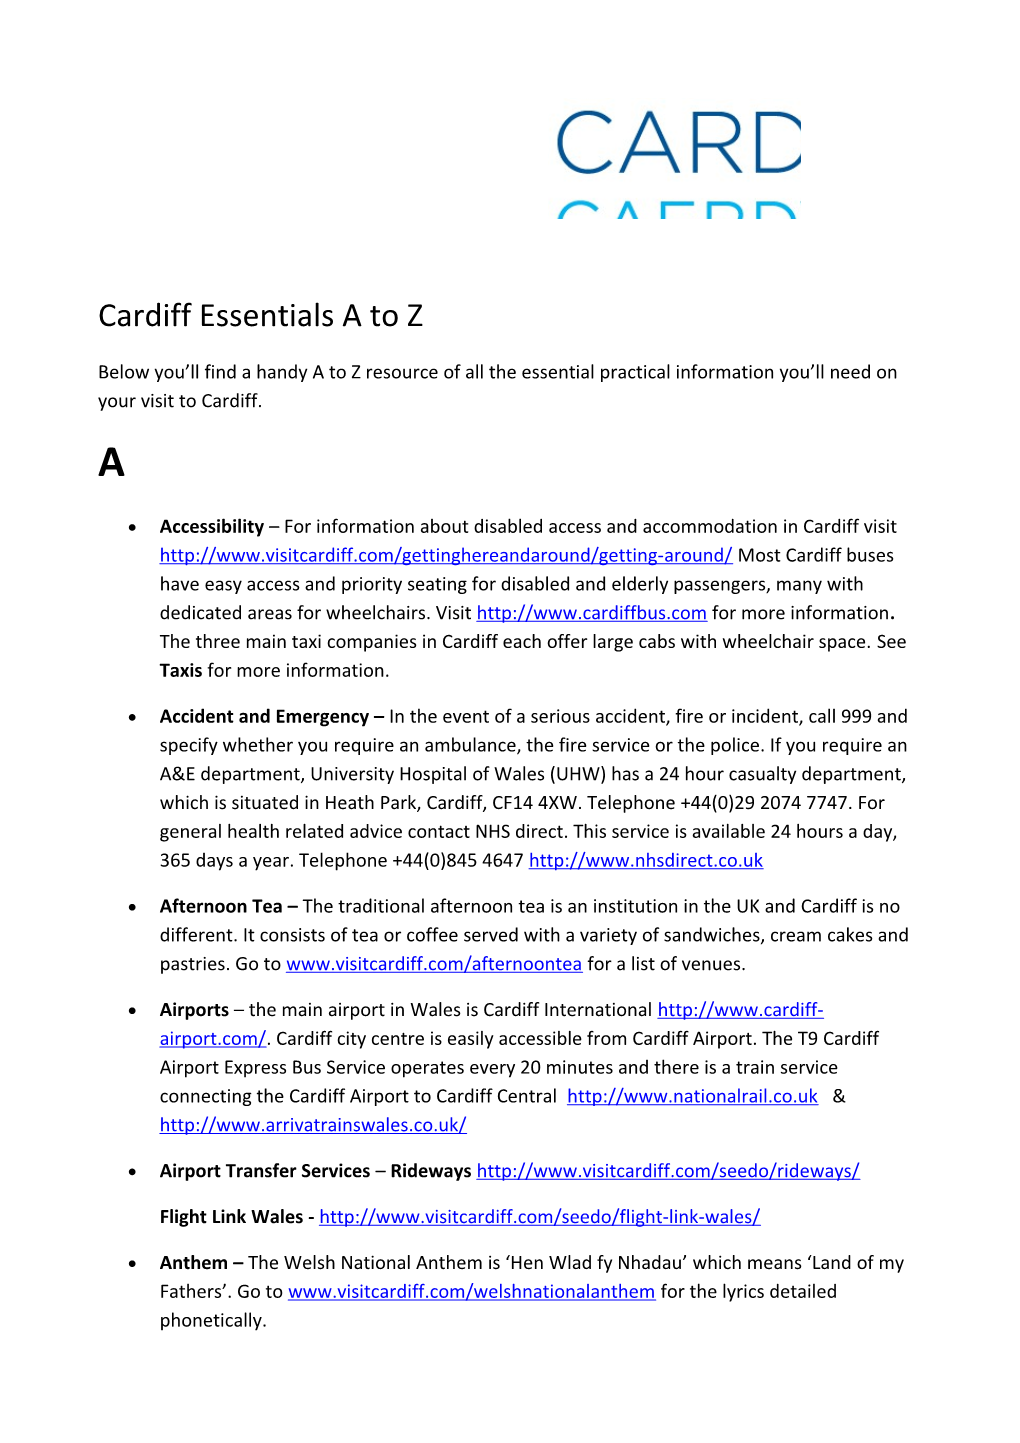 Cardiff Essentials a to Z